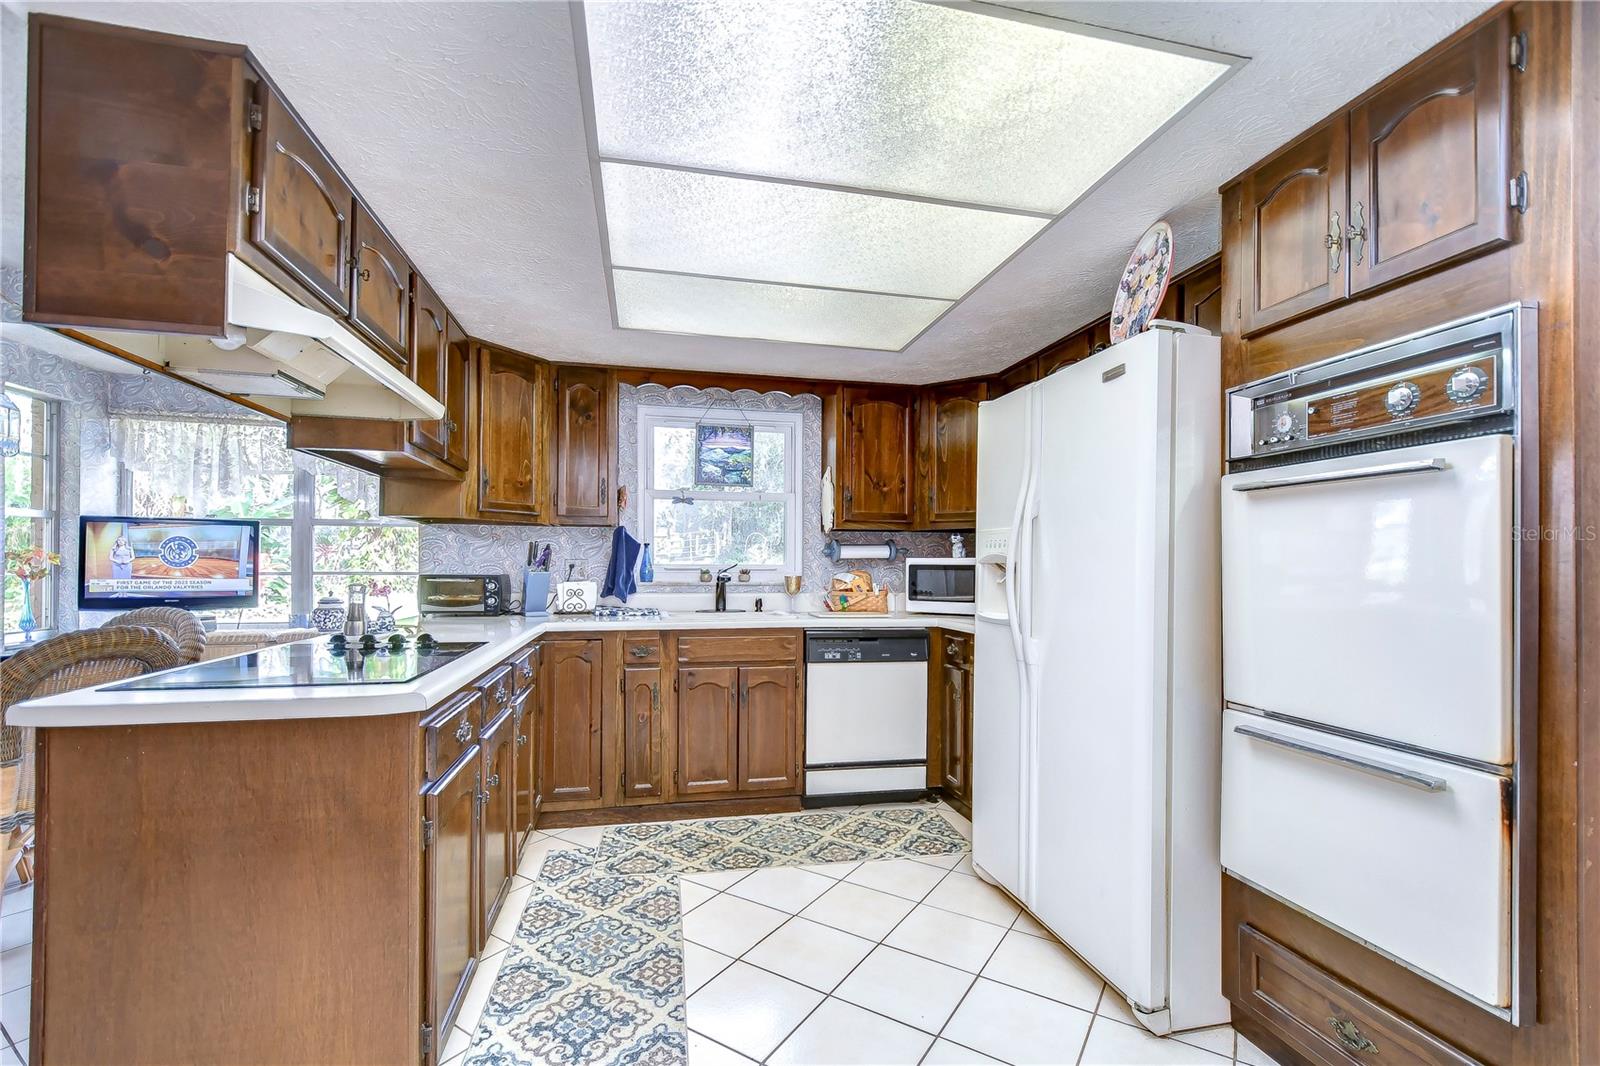 You'll love cooking meal in this kitchen!